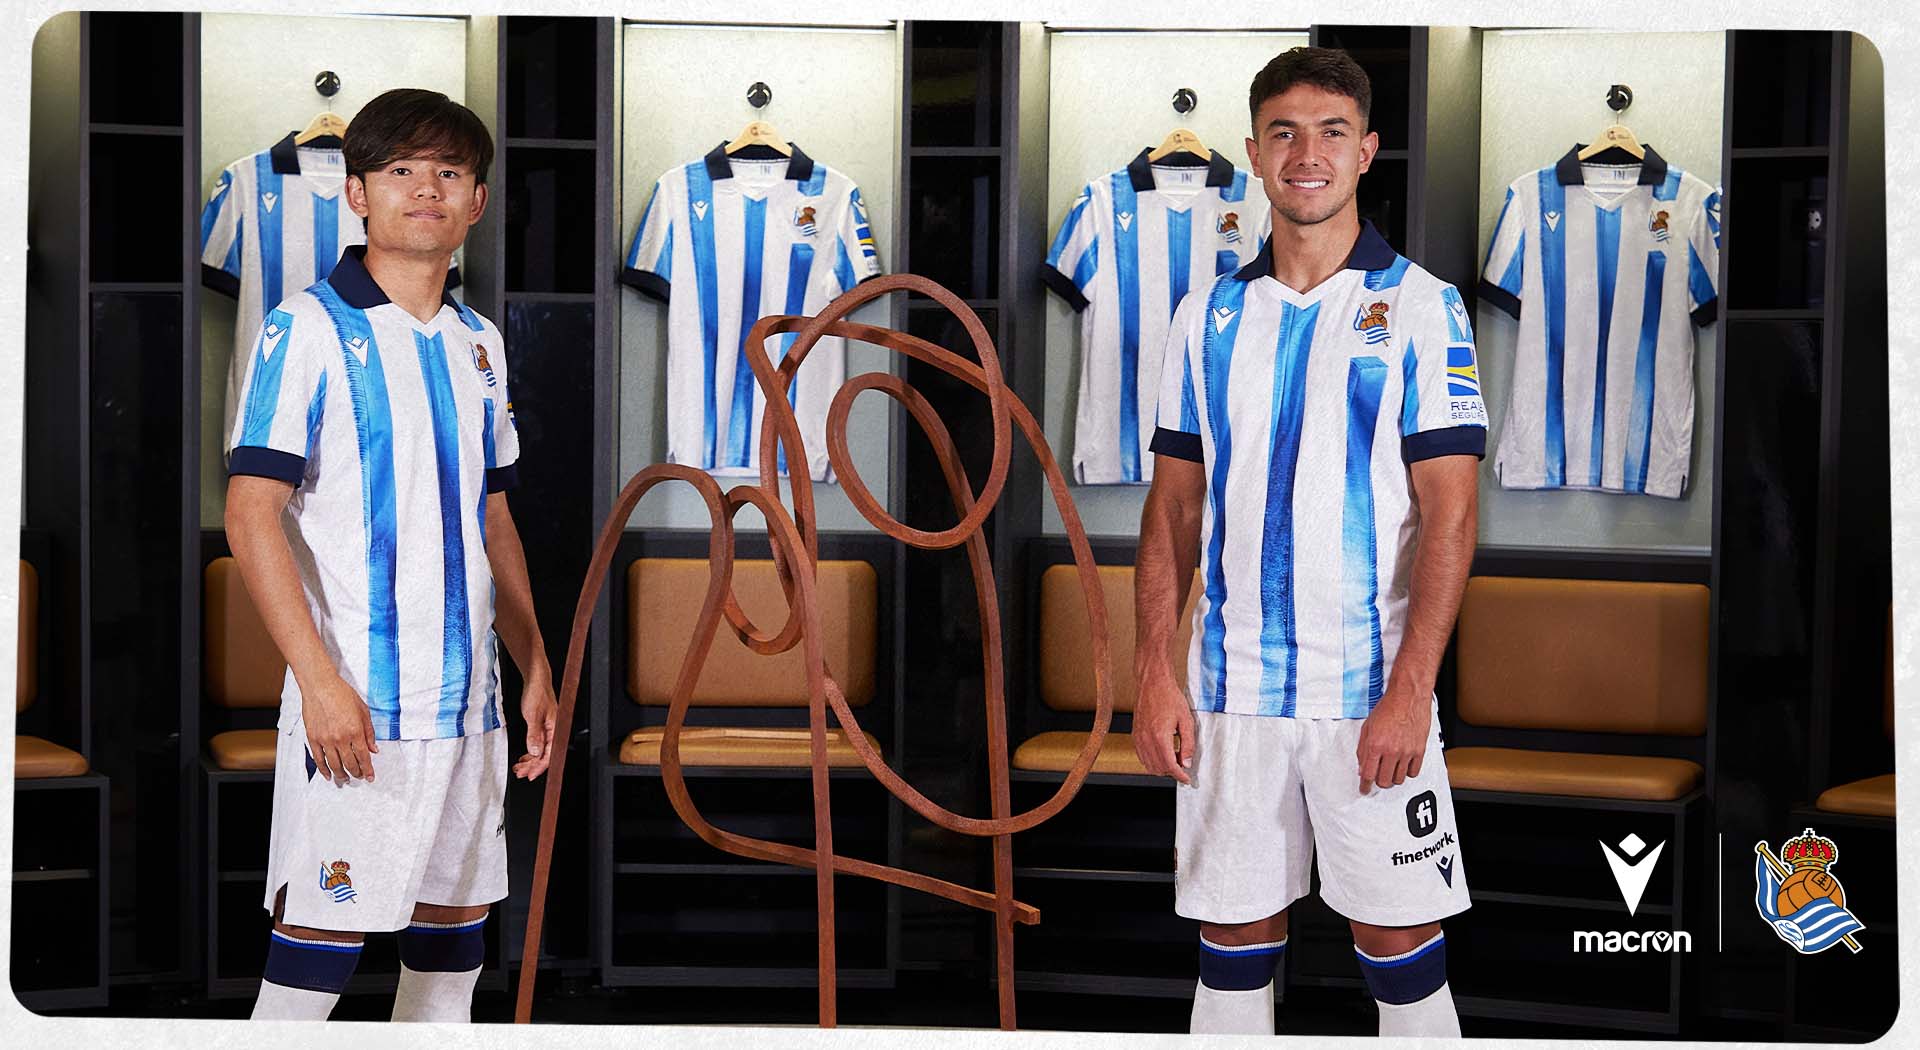 Macron ‘Sculptural’ design and graphics for the new Home jersey of Real Sociedad | Image 1